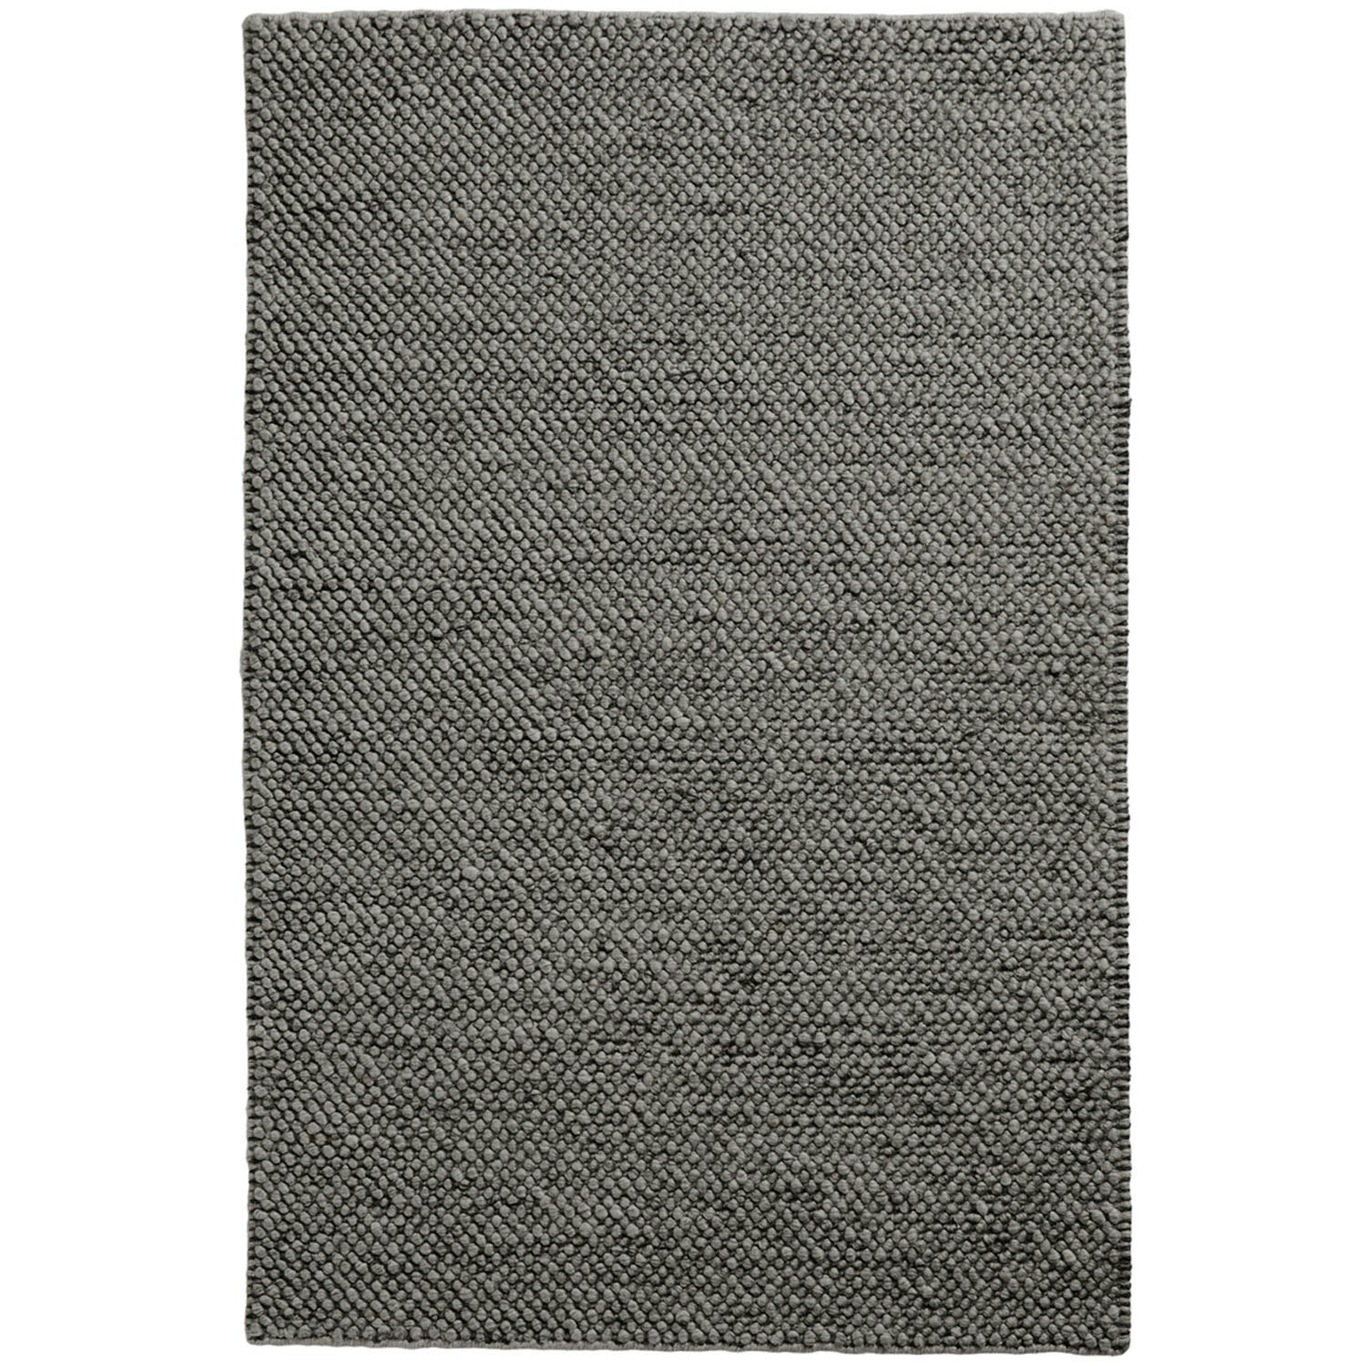 Tact Teppich Wolle 200x300 cm, Anthracite Grey